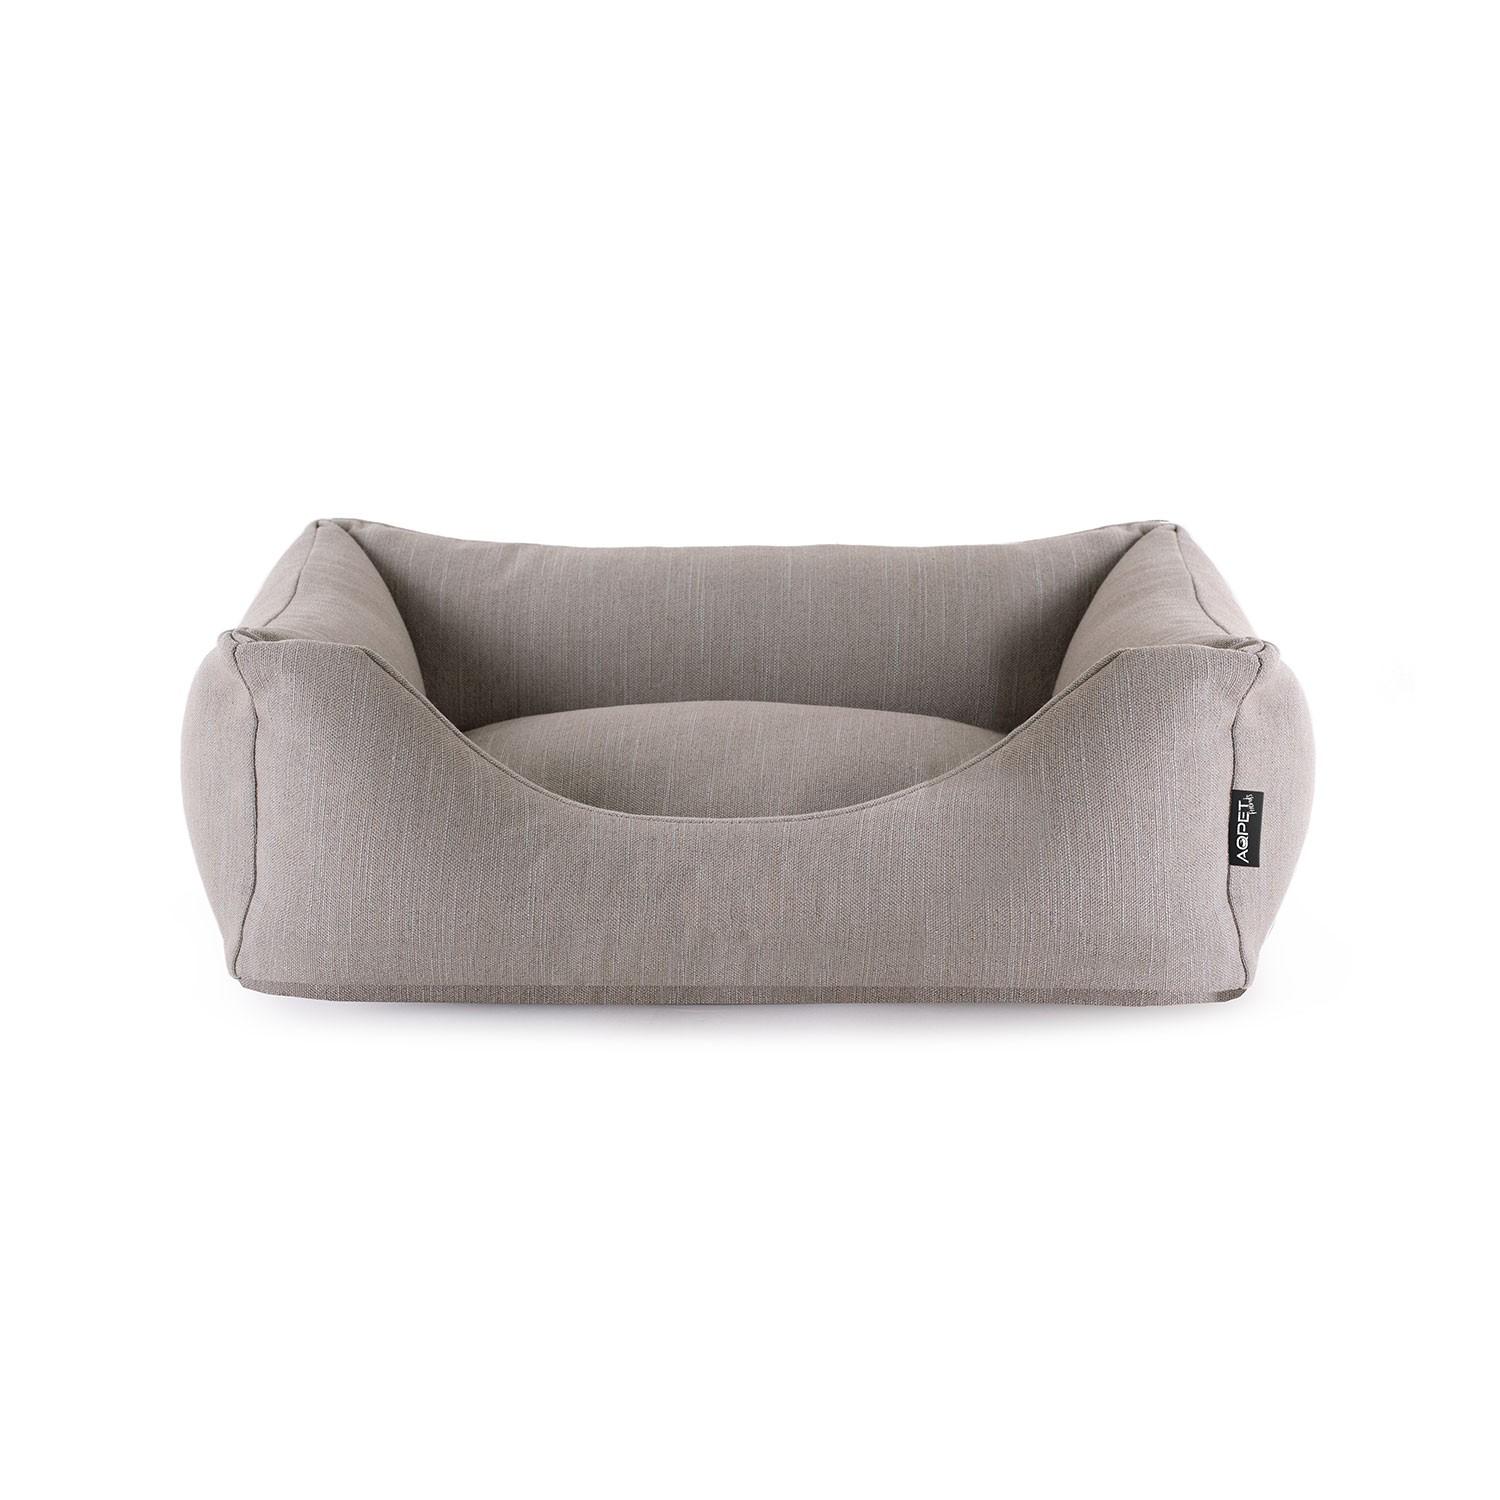 Cushy pet MOON BED dog bed made with recycled fabric